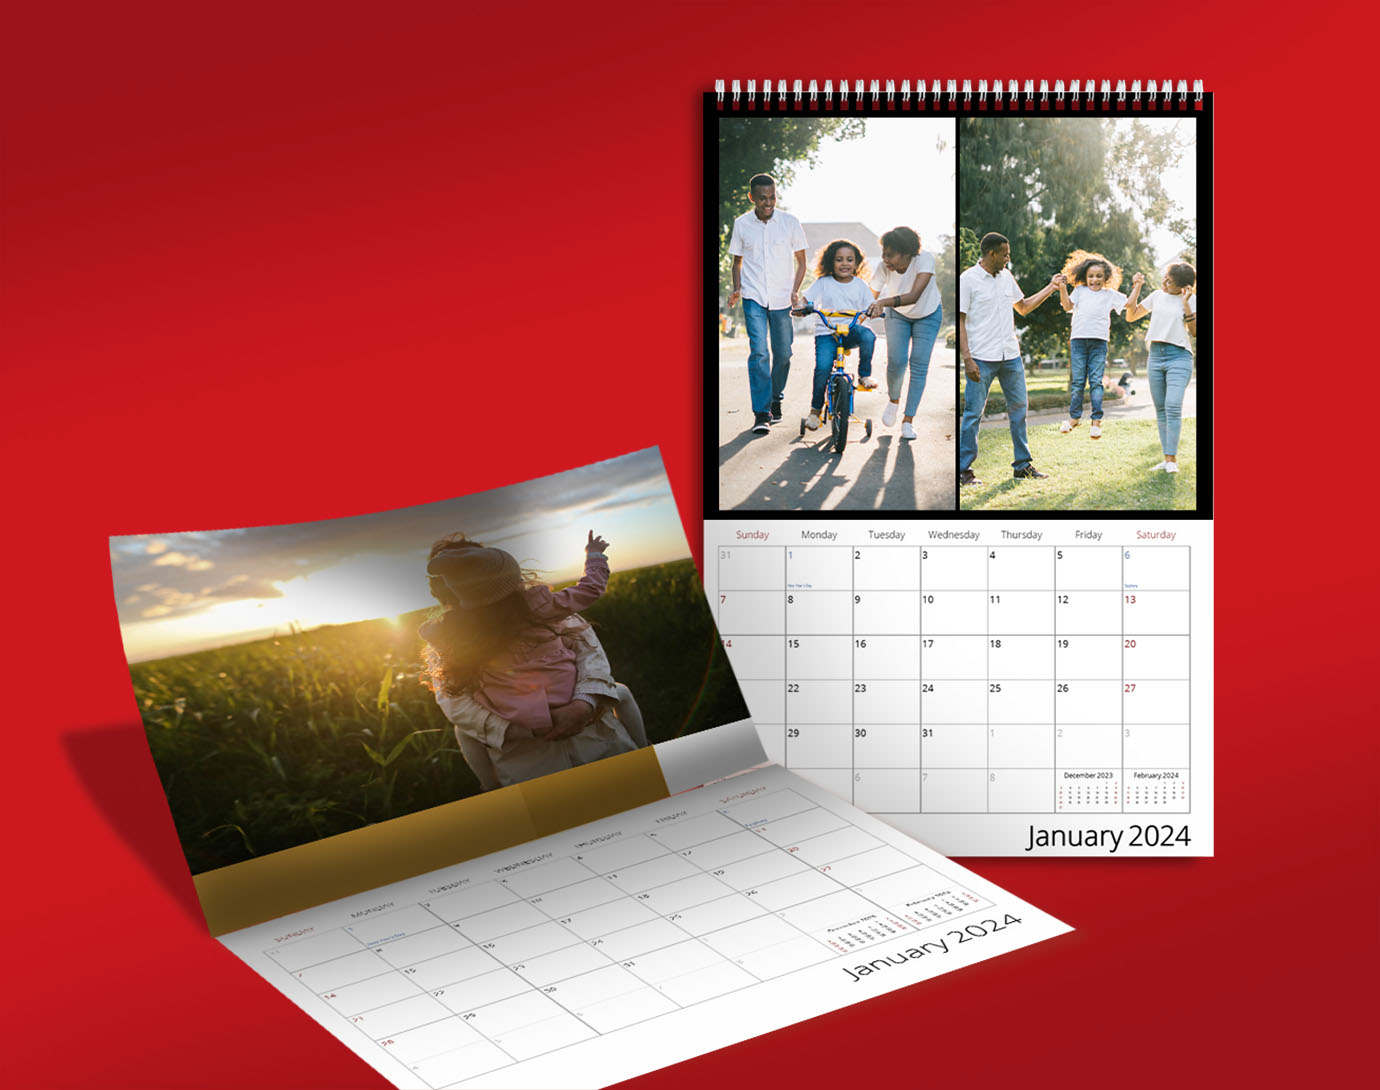 Printing, copying, photo gifts & more – Staples Printing